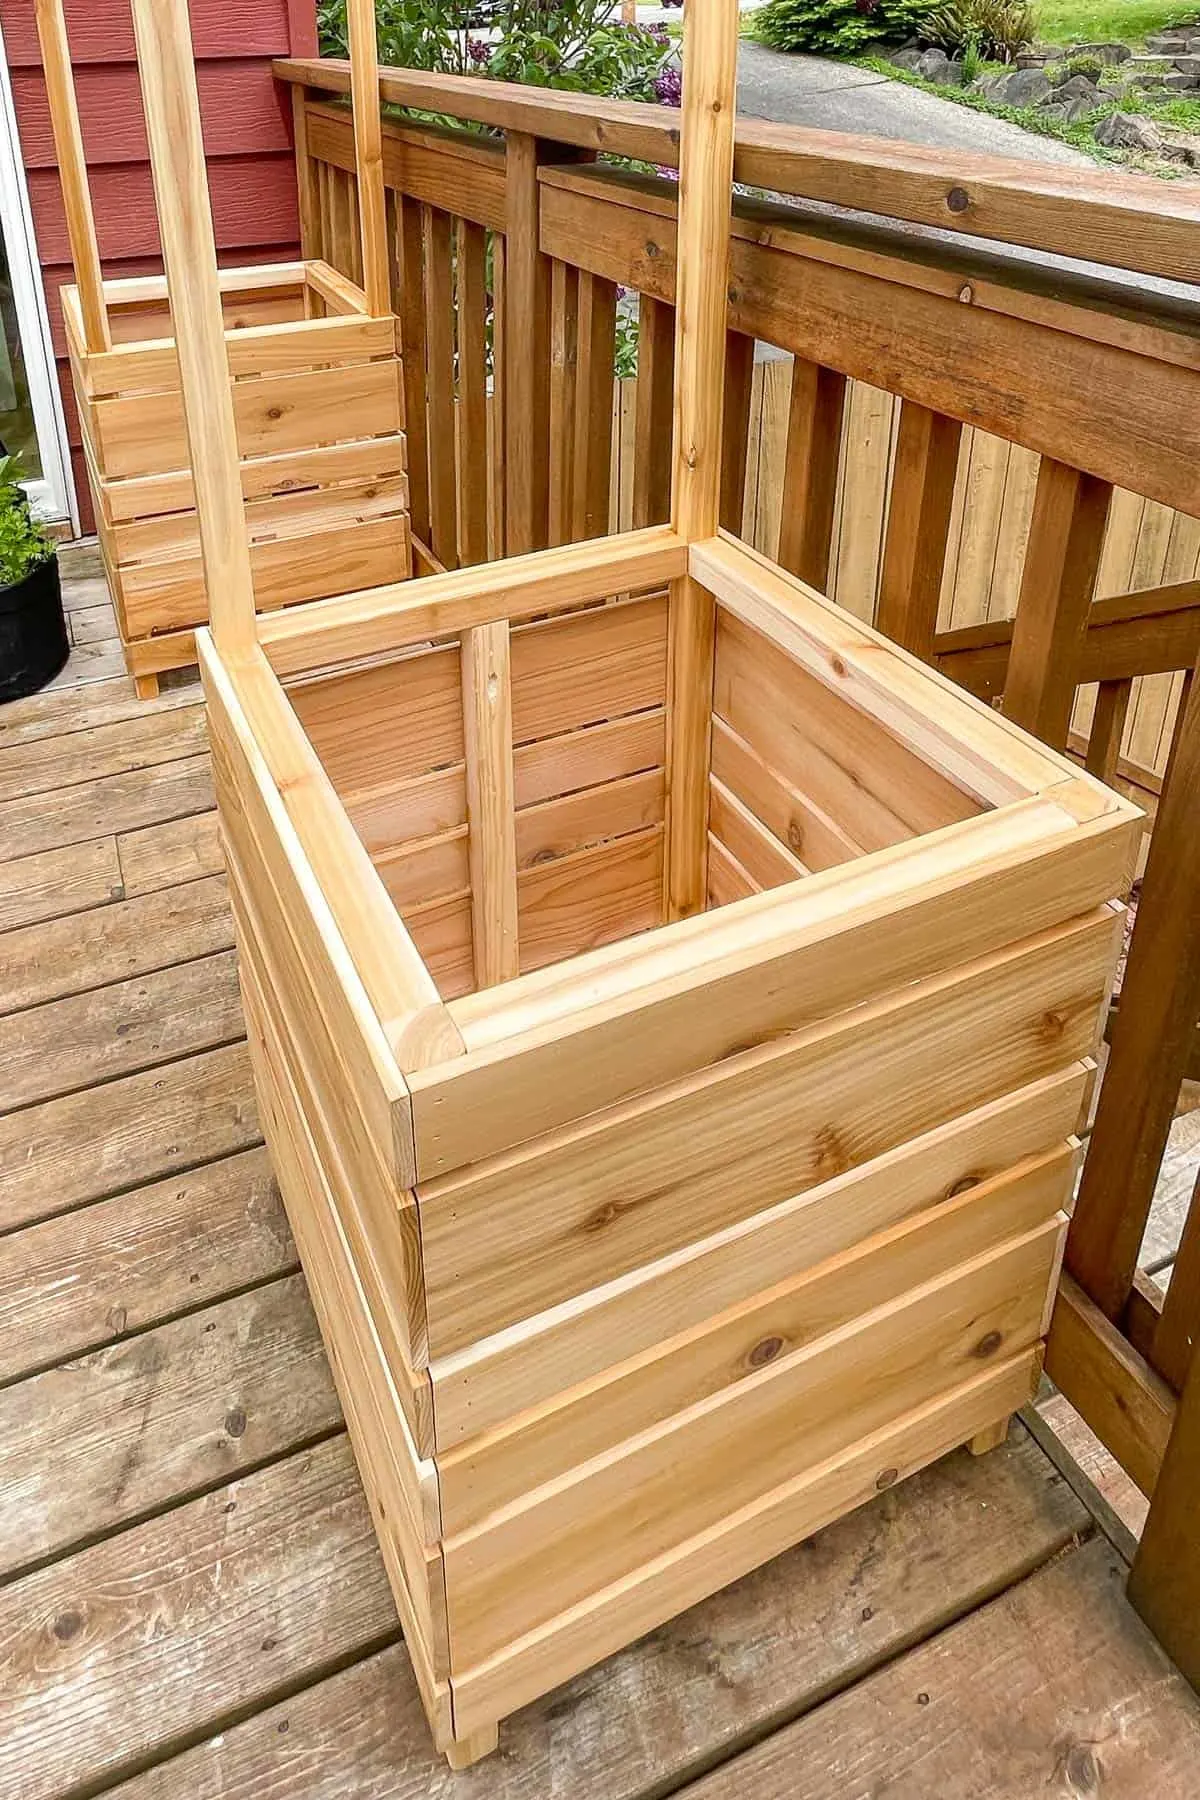 side planter boxes for plant stand in place on deck